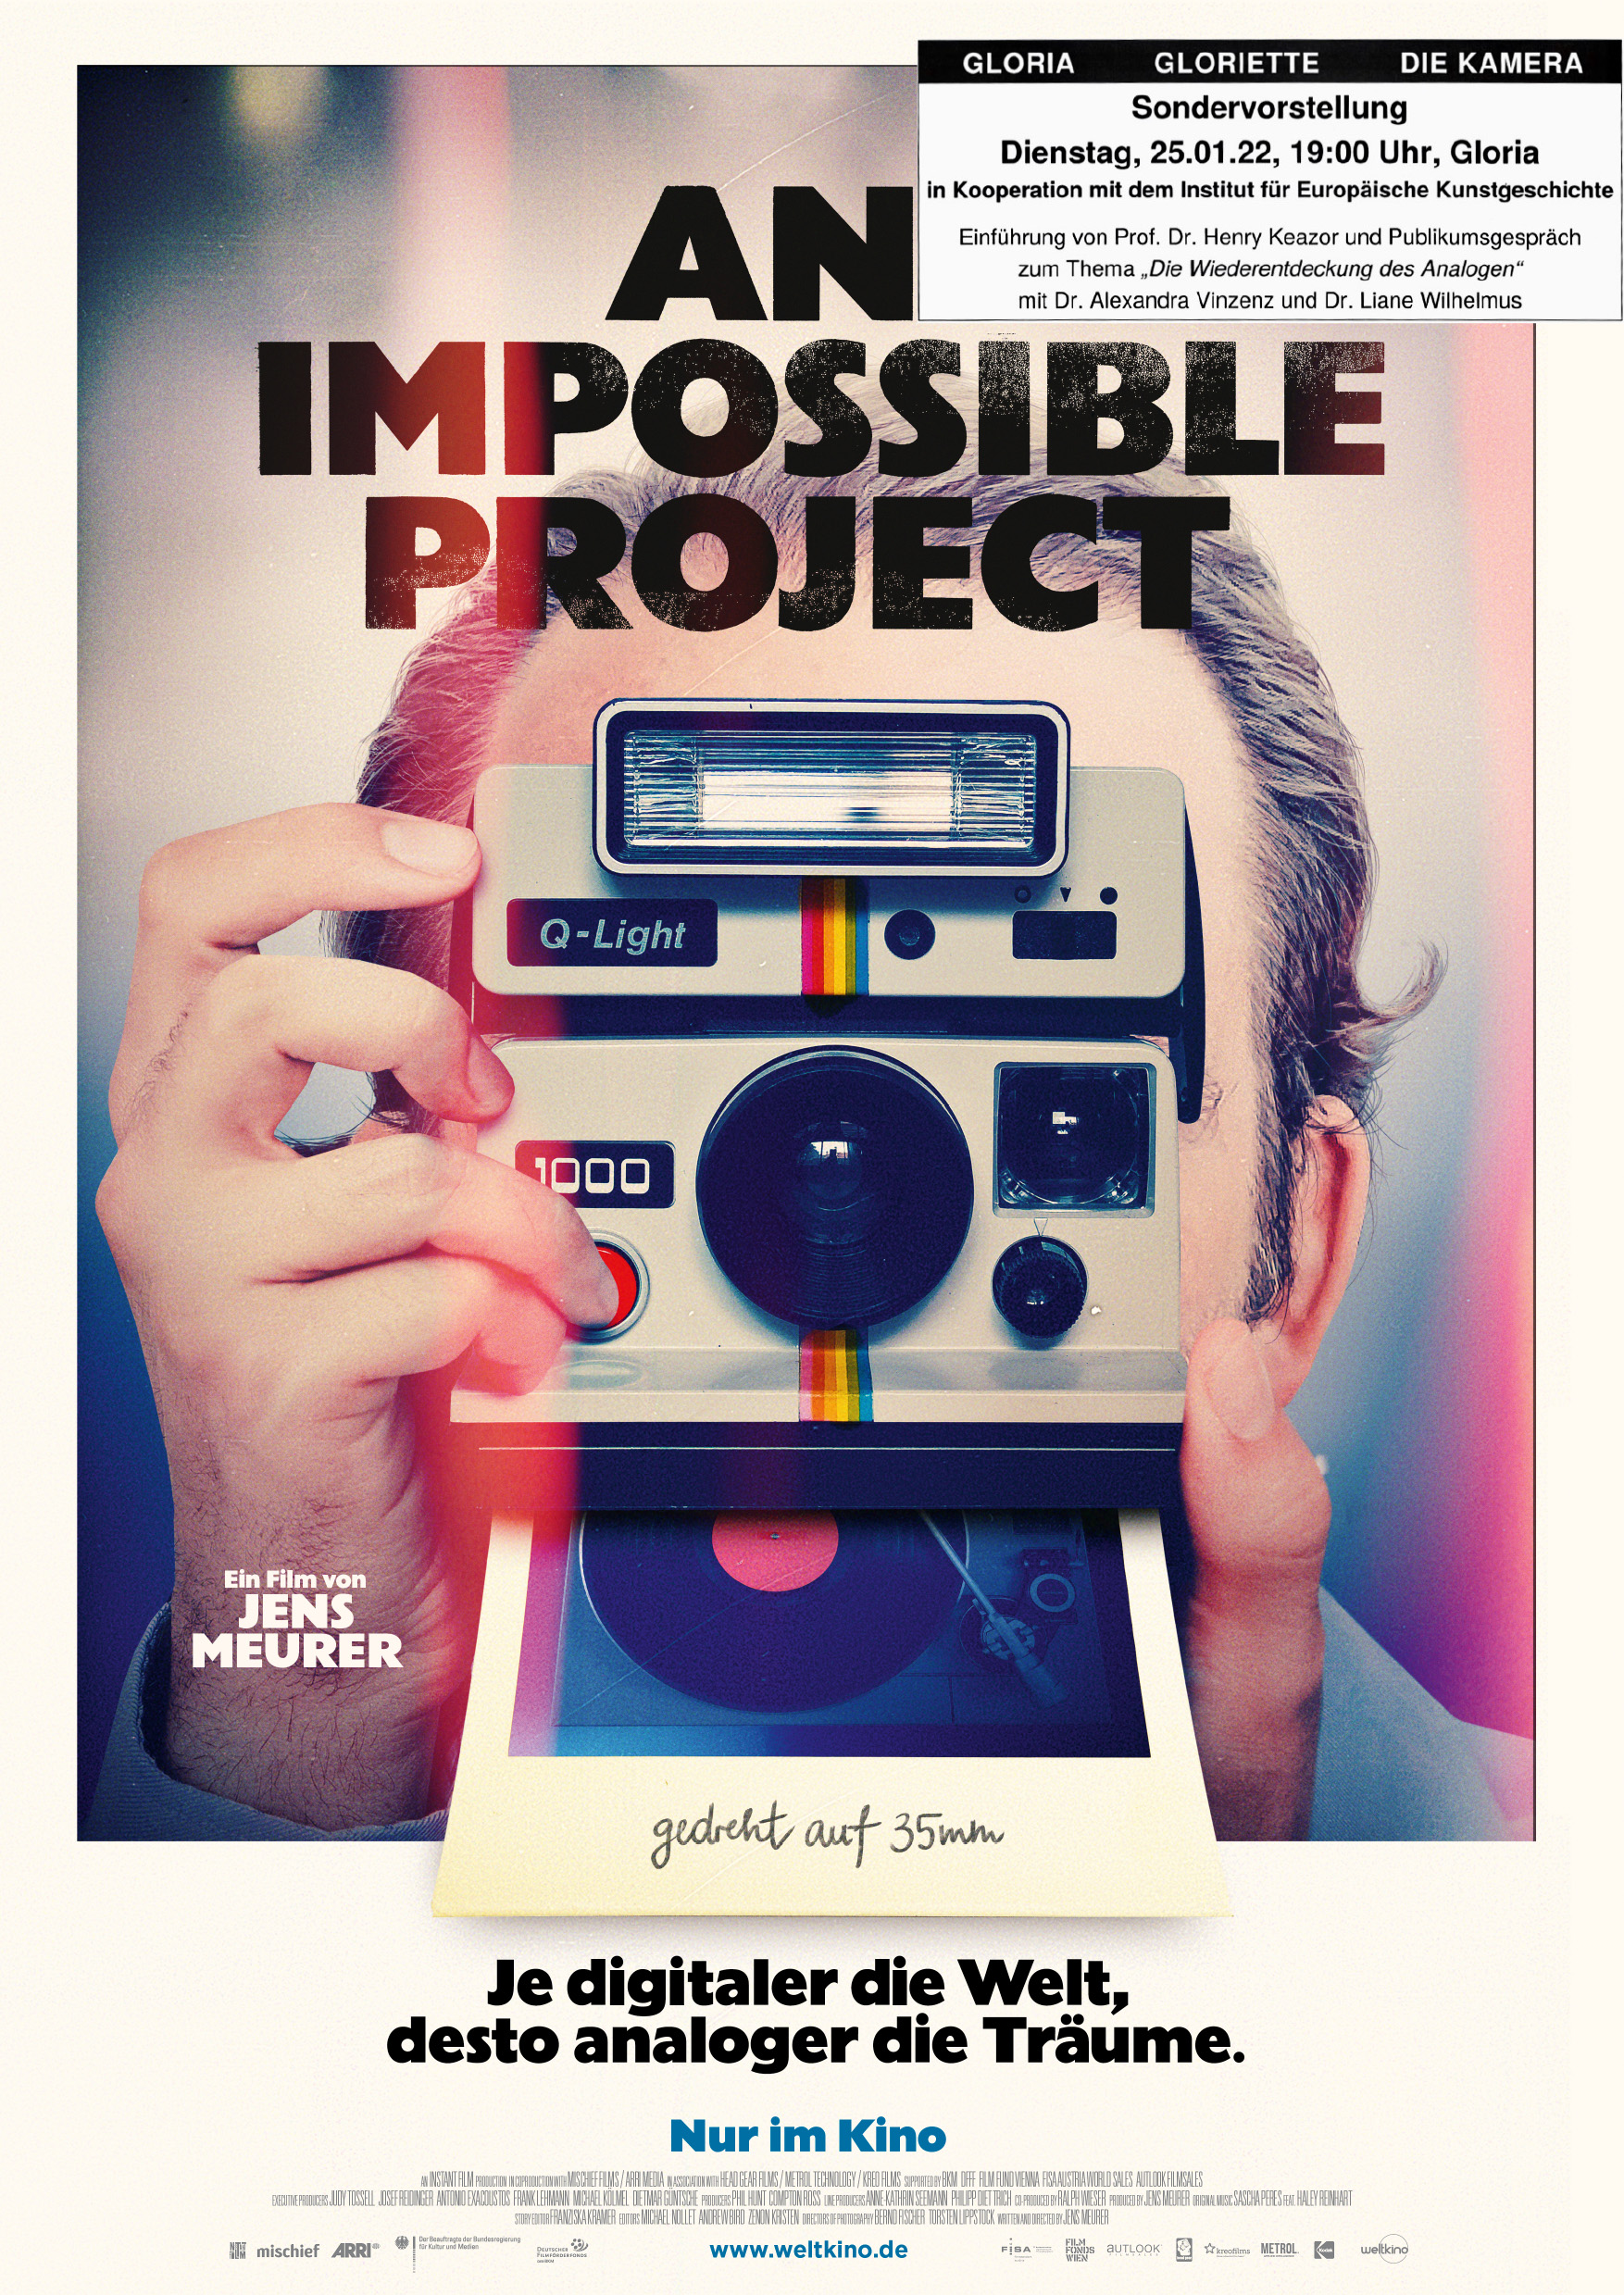 An Impossible Project